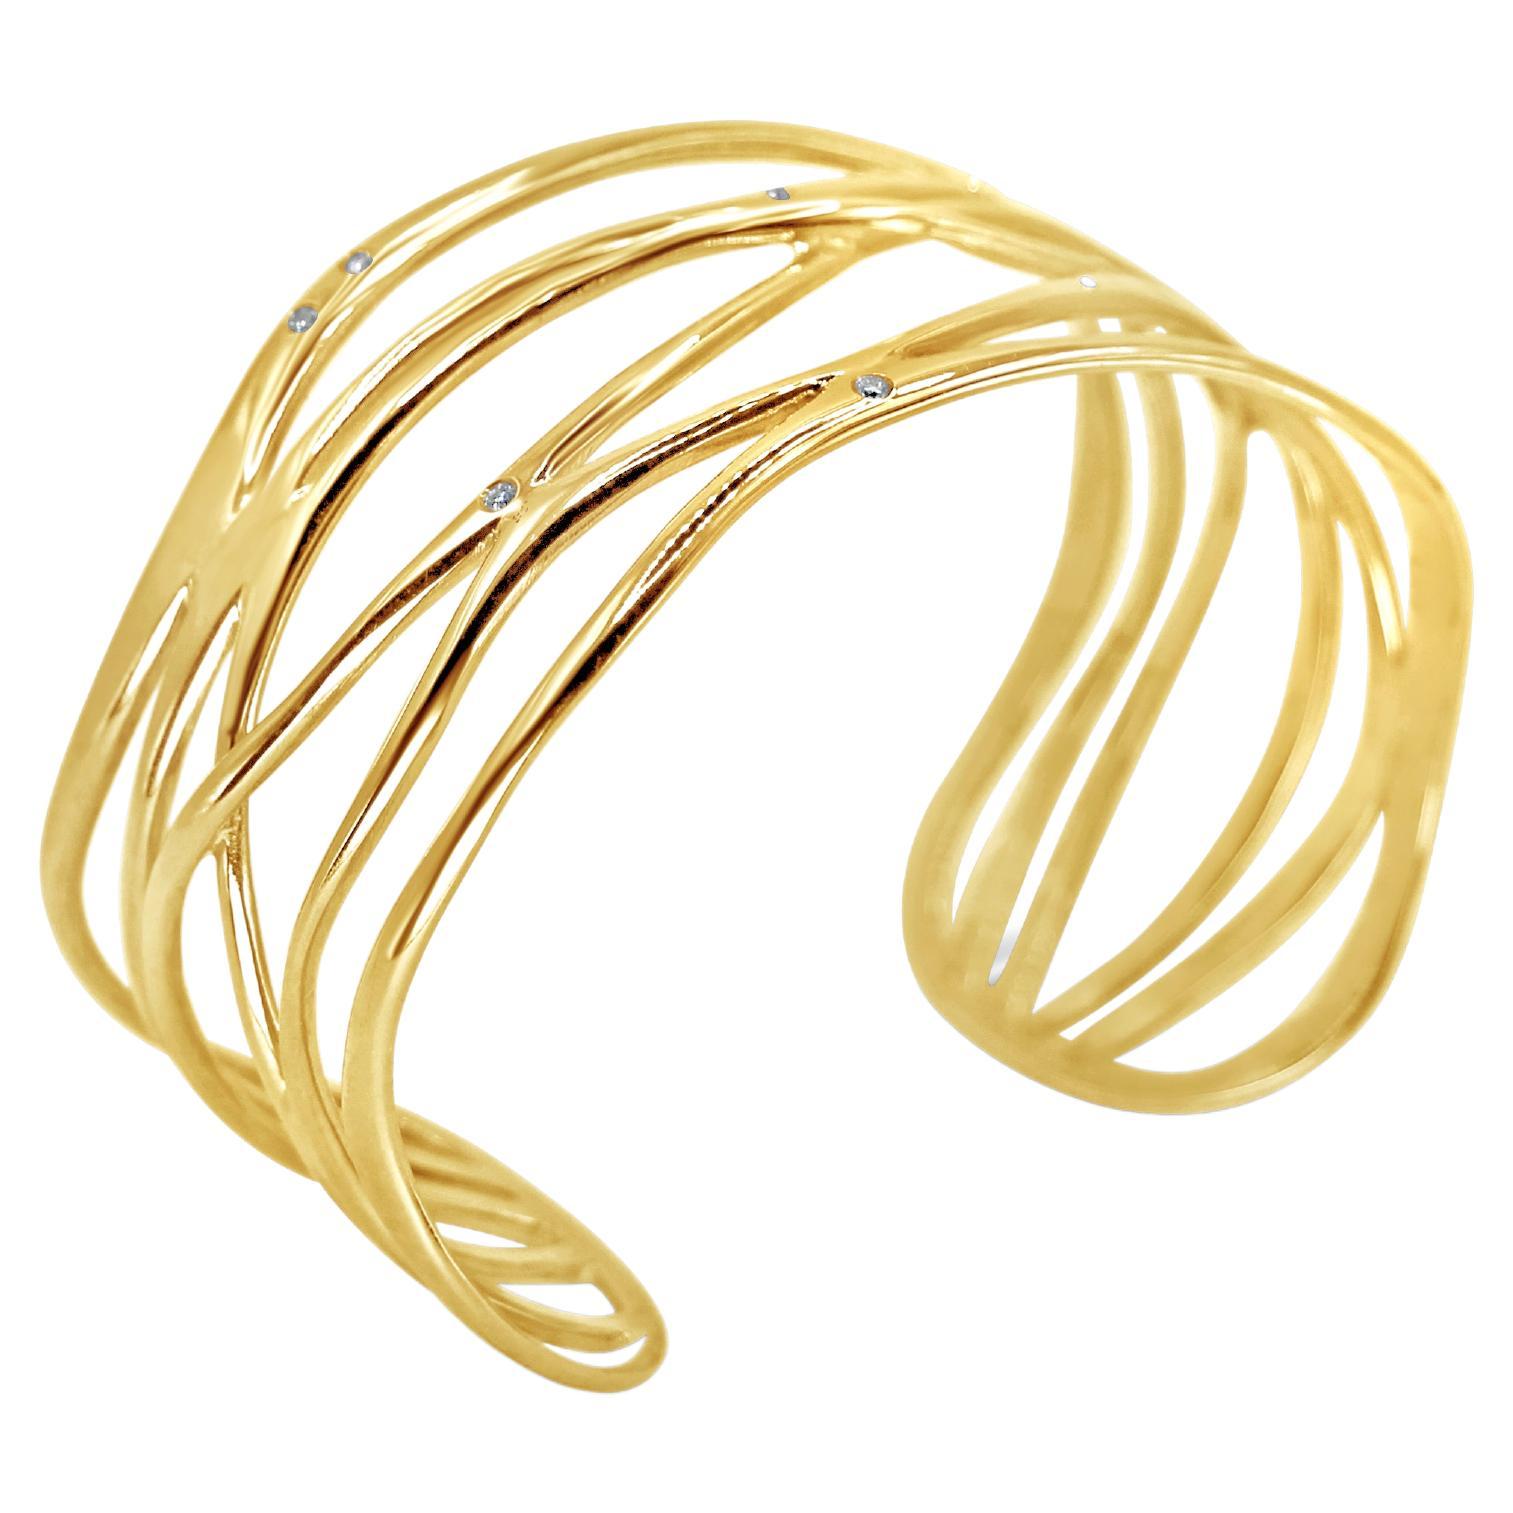 Waves Cage Cuff Bangle Bracelet White Brilliant Cut Diamonds 18Kt Yellow Gold For Sale